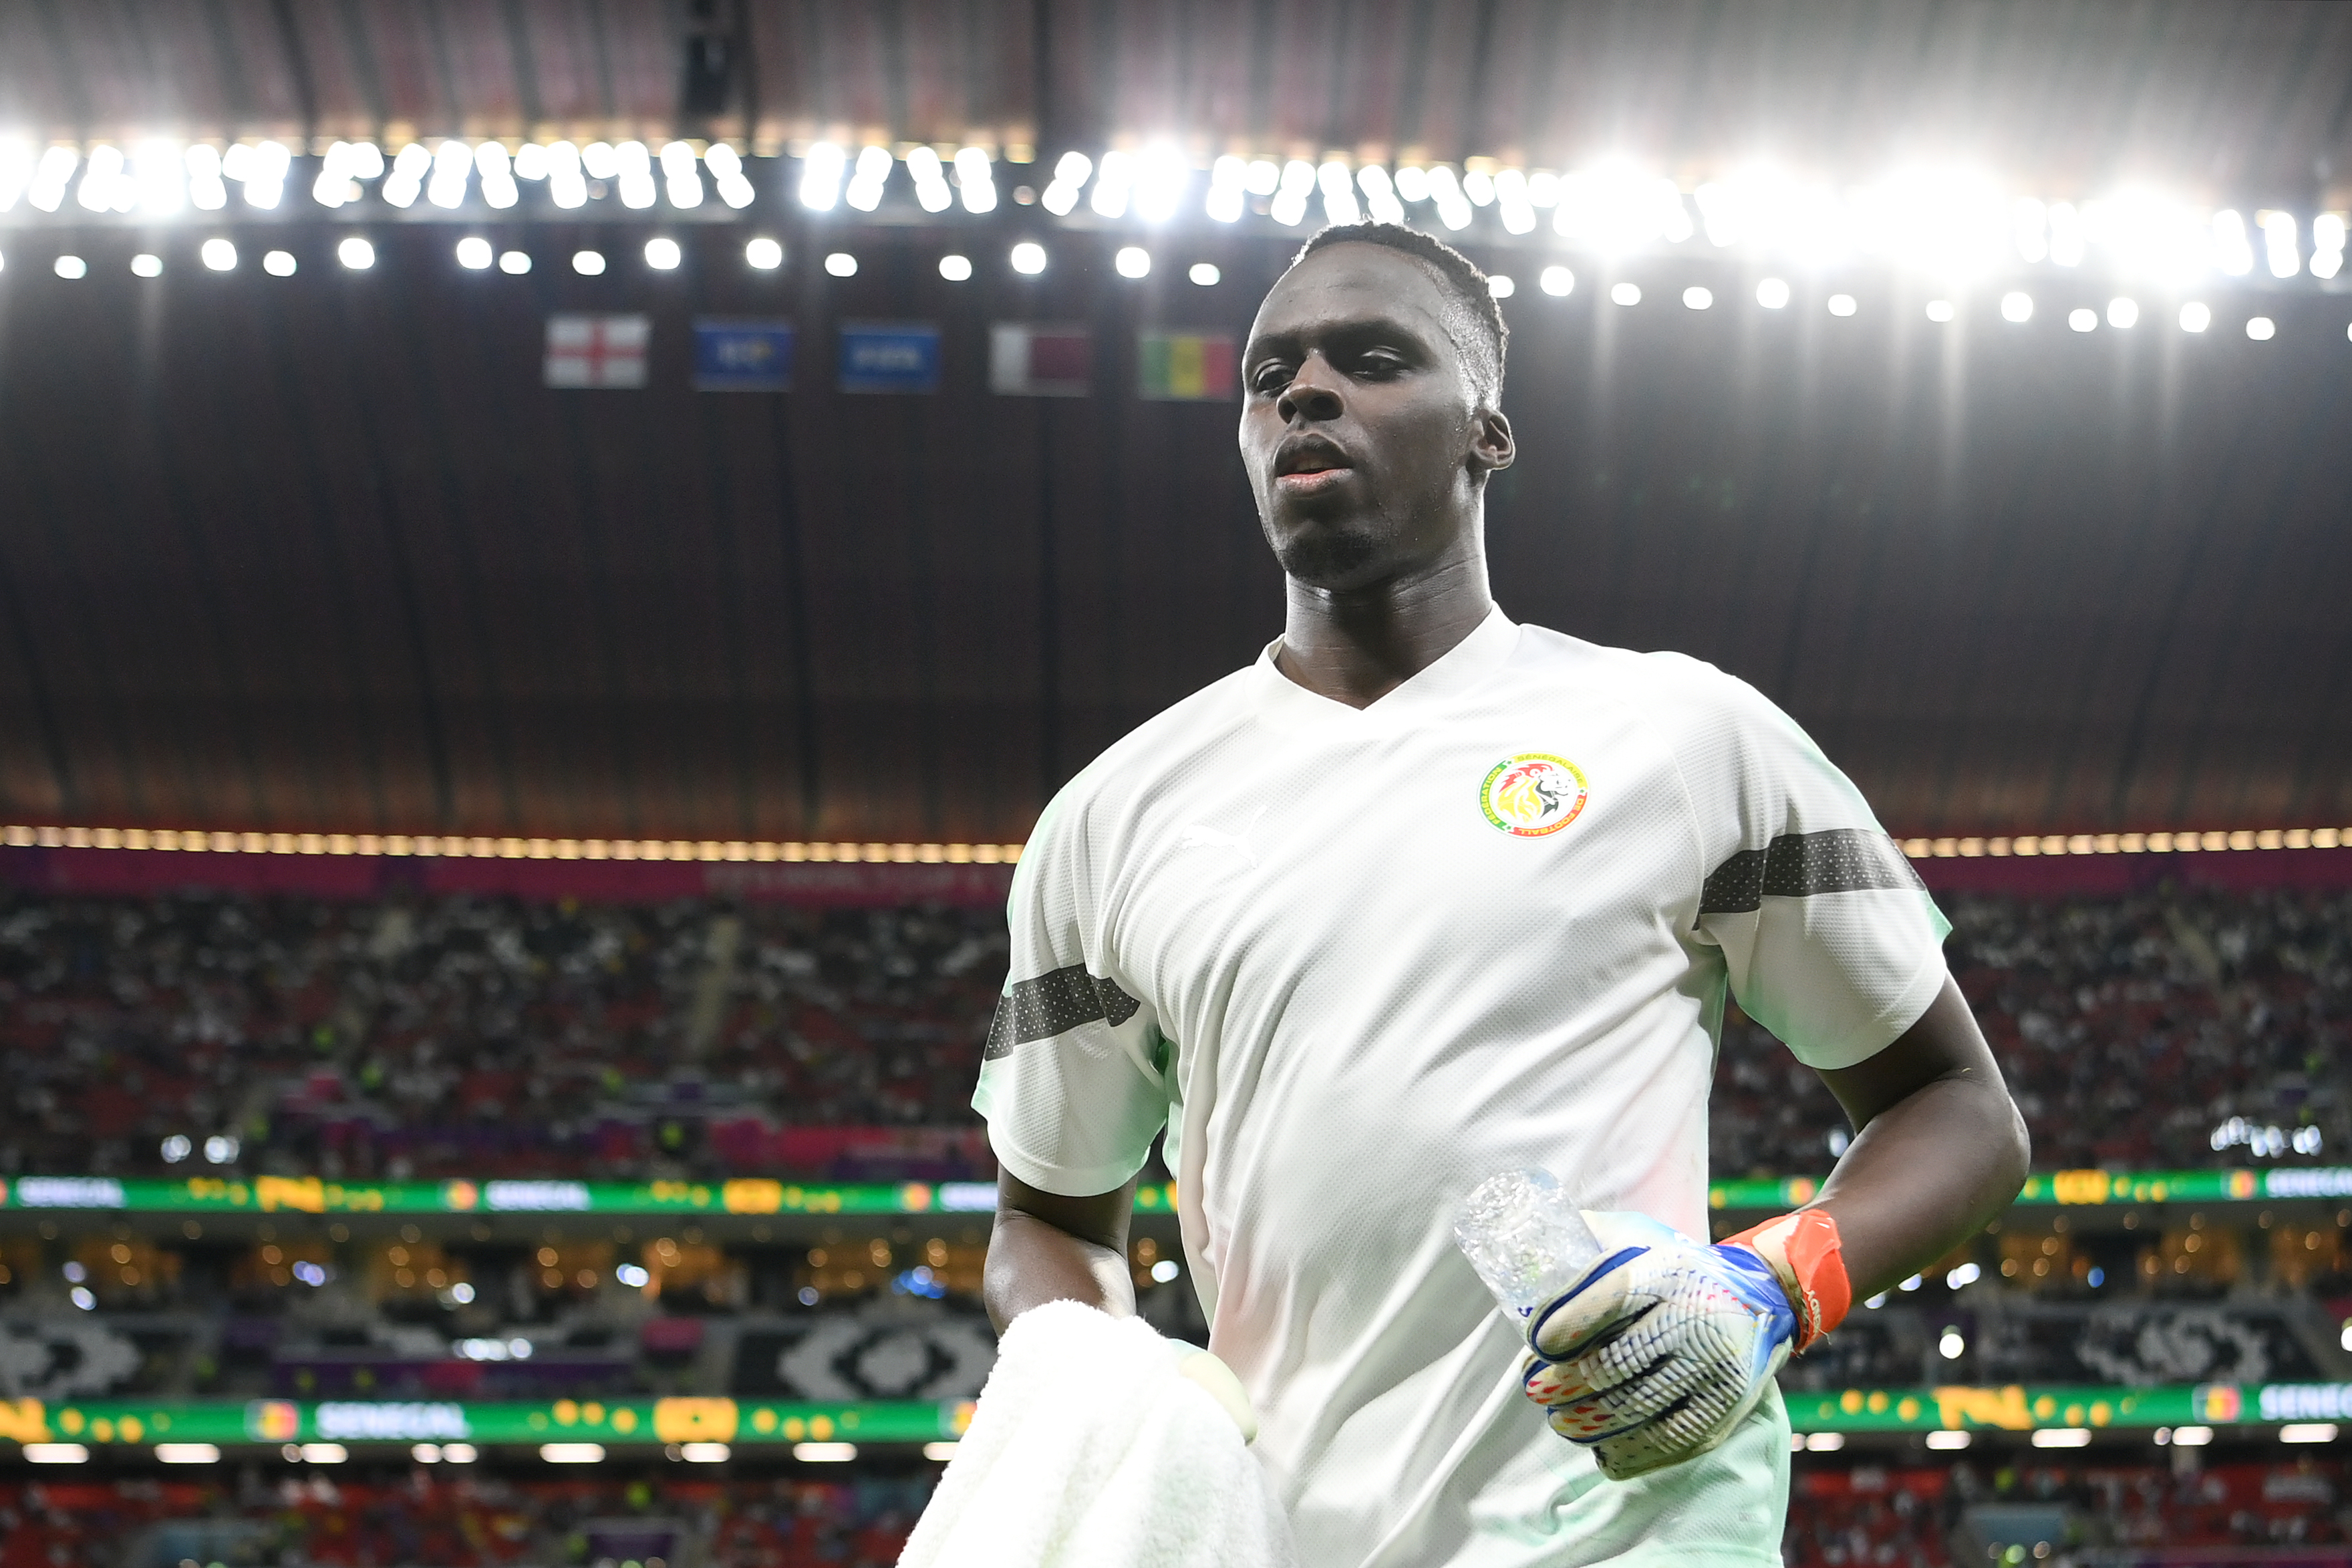 Édouard Mendy of Senegal warms up before the match between England and Senegal at Al Bayt Stadium in Al Khor, Qatar on Sunday.